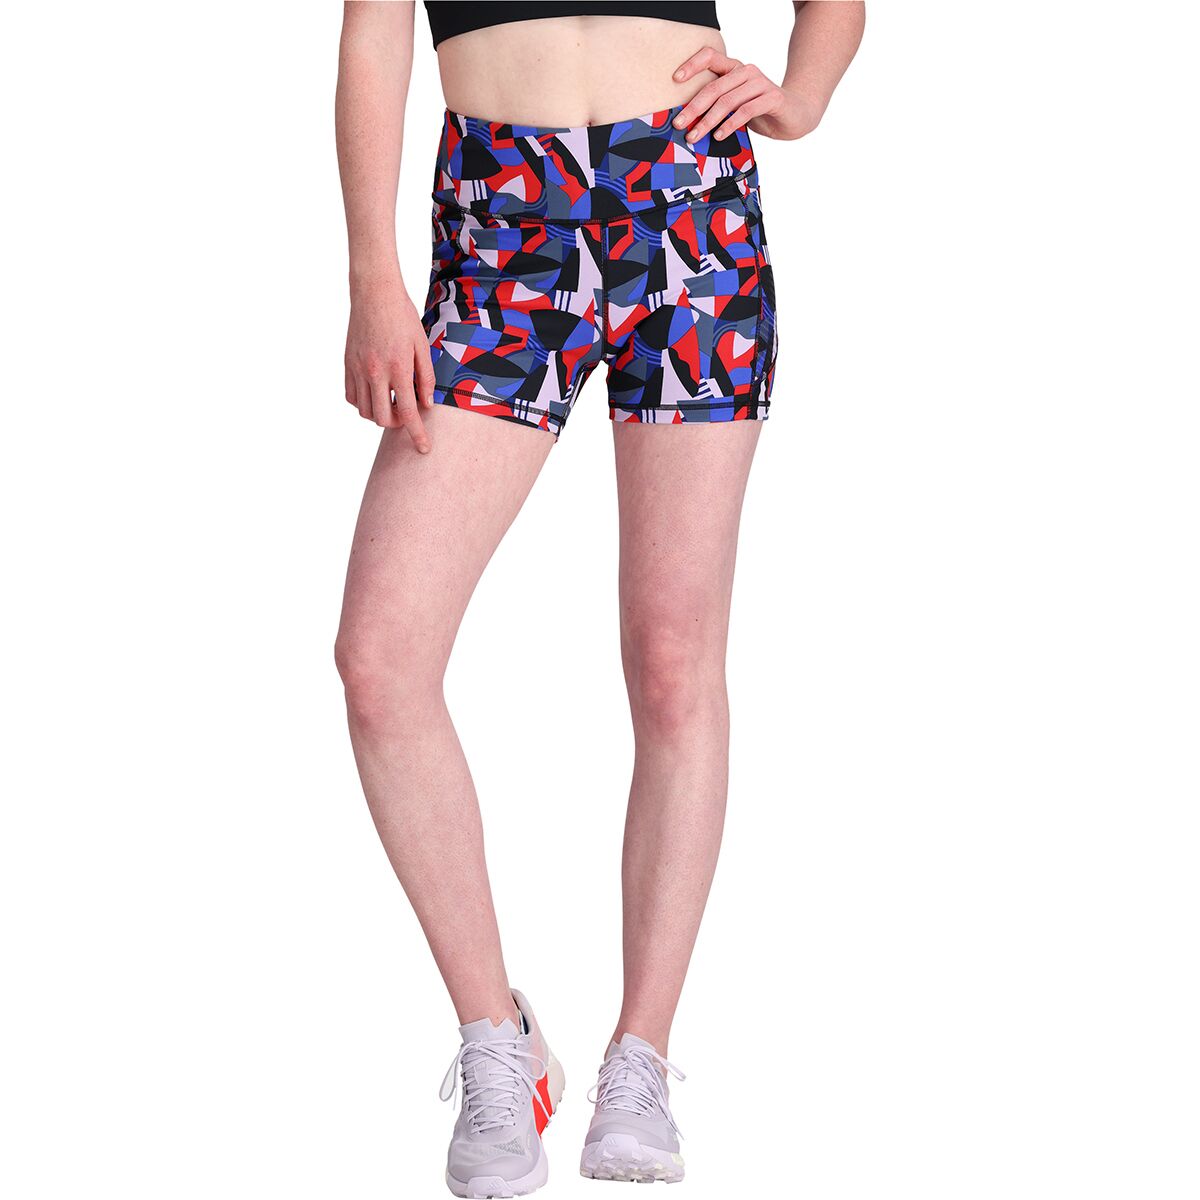 Outdoor Research Ad-Vantage 4in Printed Shorts - Women's